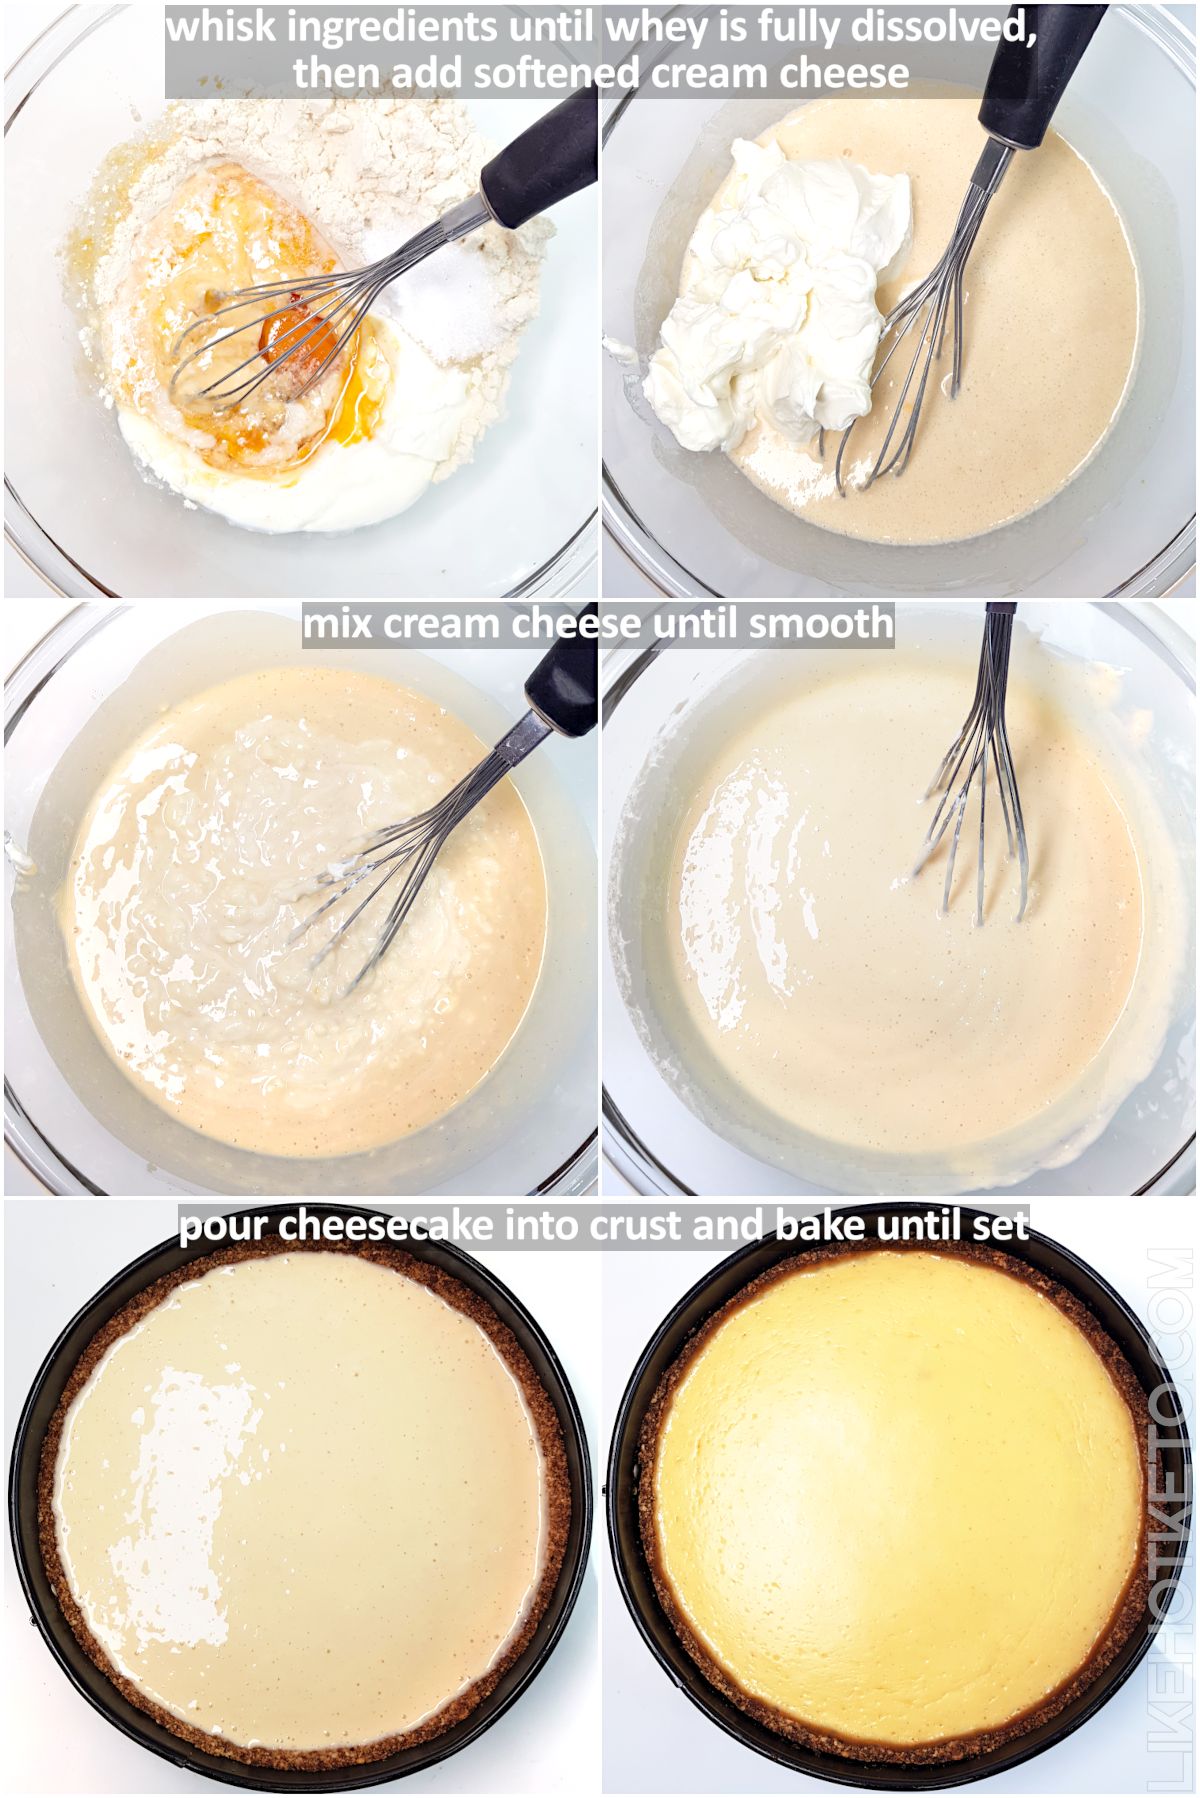 Steps to make keto protein cheesecake: mixing the ingredients and pouring the batter into the pan or crust, and the baked cheesecake.